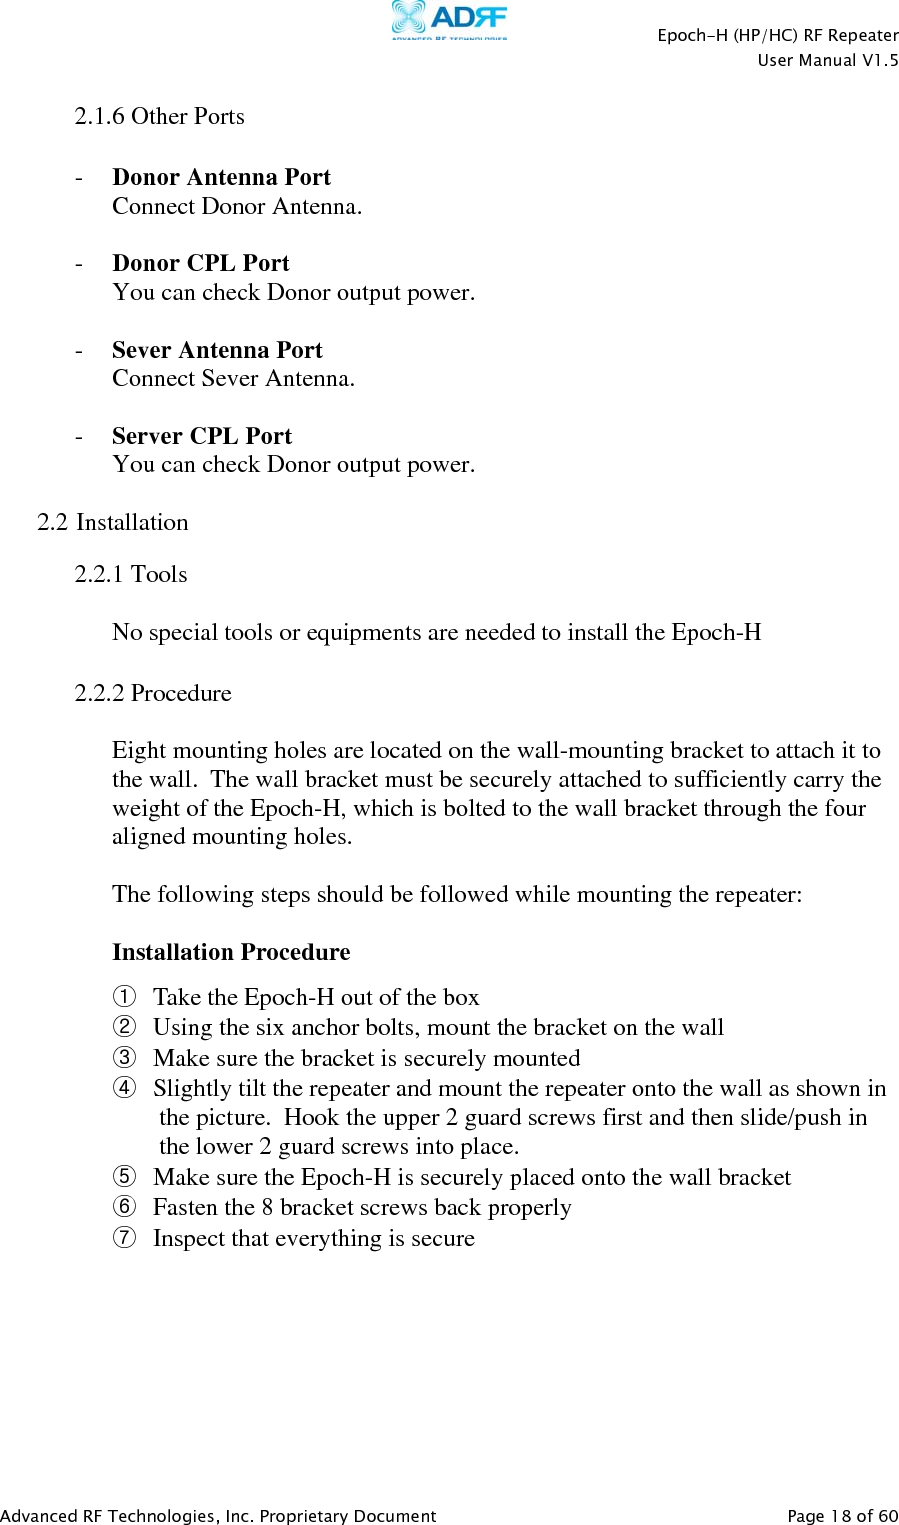    Epoch-H (HP/HC) RF Repeater  User Manual V1.5  Advanced RF Technologies, Inc. Proprietary Document   Page 18 of 60   2.1.6 Other Ports  - Donor Antenna Port Connect Donor Antenna.  - Donor CPL Port You can check Donor output power.  - Sever Antenna Port Connect Sever Antenna.  - Server CPL Port You can check Donor output power.  2.2 Installation   2.2.1 Tools  No special tools or equipments are needed to install the Epoch-H  2.2.2 Procedure  Eight mounting holes are located on the wall-mounting bracket to attach it to the wall.  The wall bracket must be securely attached to sufficiently carry the weight of the Epoch-H, which is bolted to the wall bracket through the four aligned mounting holes.   The following steps should be followed while mounting the repeater:  Installation Procedure ① Take the Epoch-H out of the box ② Using the six anchor bolts, mount the bracket on the wall ③ Make sure the bracket is securely mounted ④ Slightly tilt the repeater and mount the repeater onto the wall as shown in the picture.  Hook the upper 2 guard screws first and then slide/push in the lower 2 guard screws into place. ⑤ Make sure the Epoch-H is securely placed onto the wall bracket ⑥ Fasten the 8 bracket screws back properly ⑦ Inspect that everything is secure  